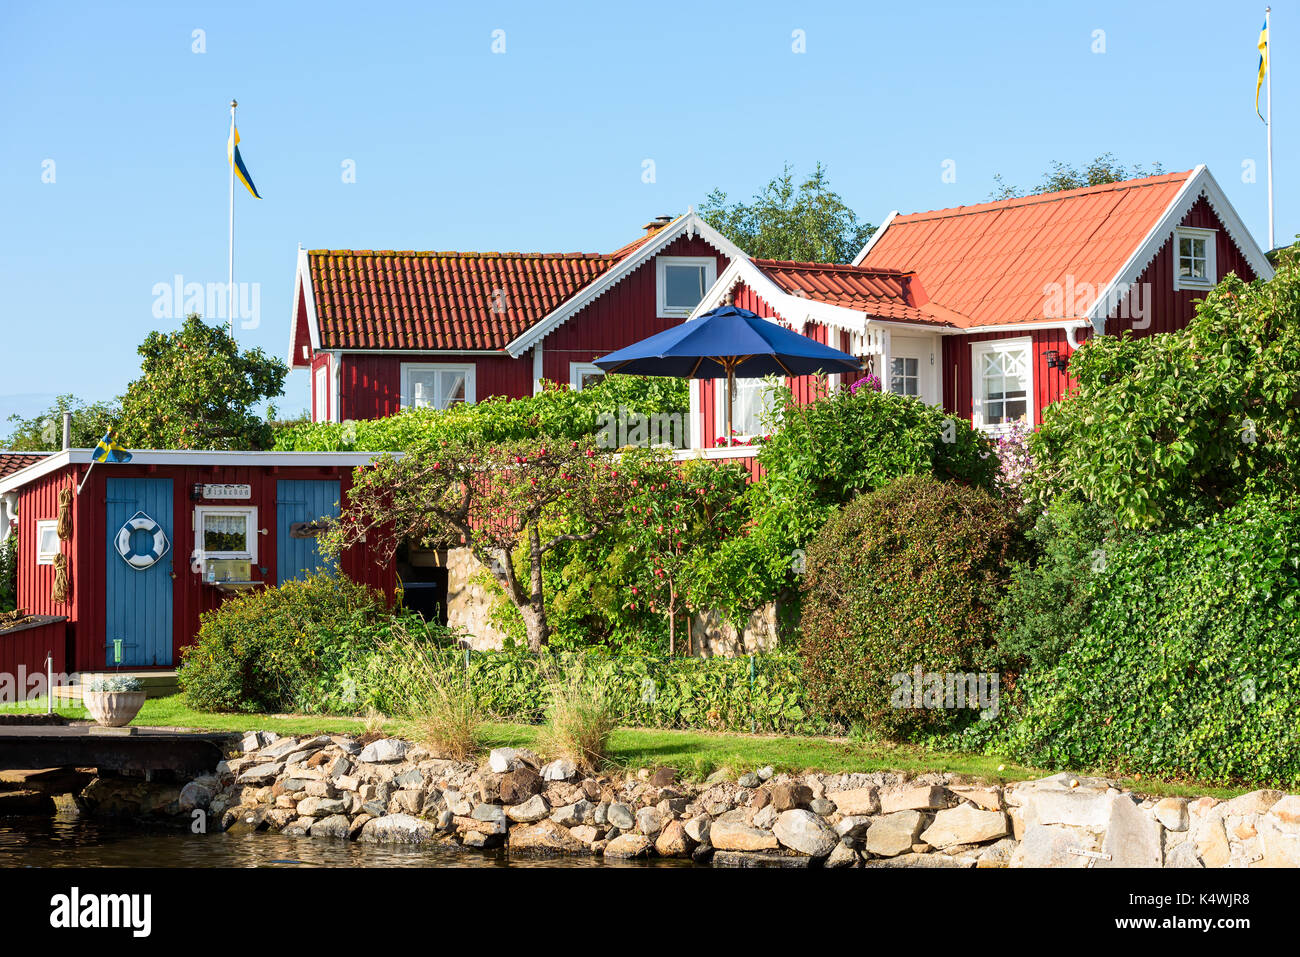 Karlskrona, Sweden - August 28, 2017: Travel documentary of the city surroundings. Seaside garden in coastal allotment area with red and white cabins  Stock Photo